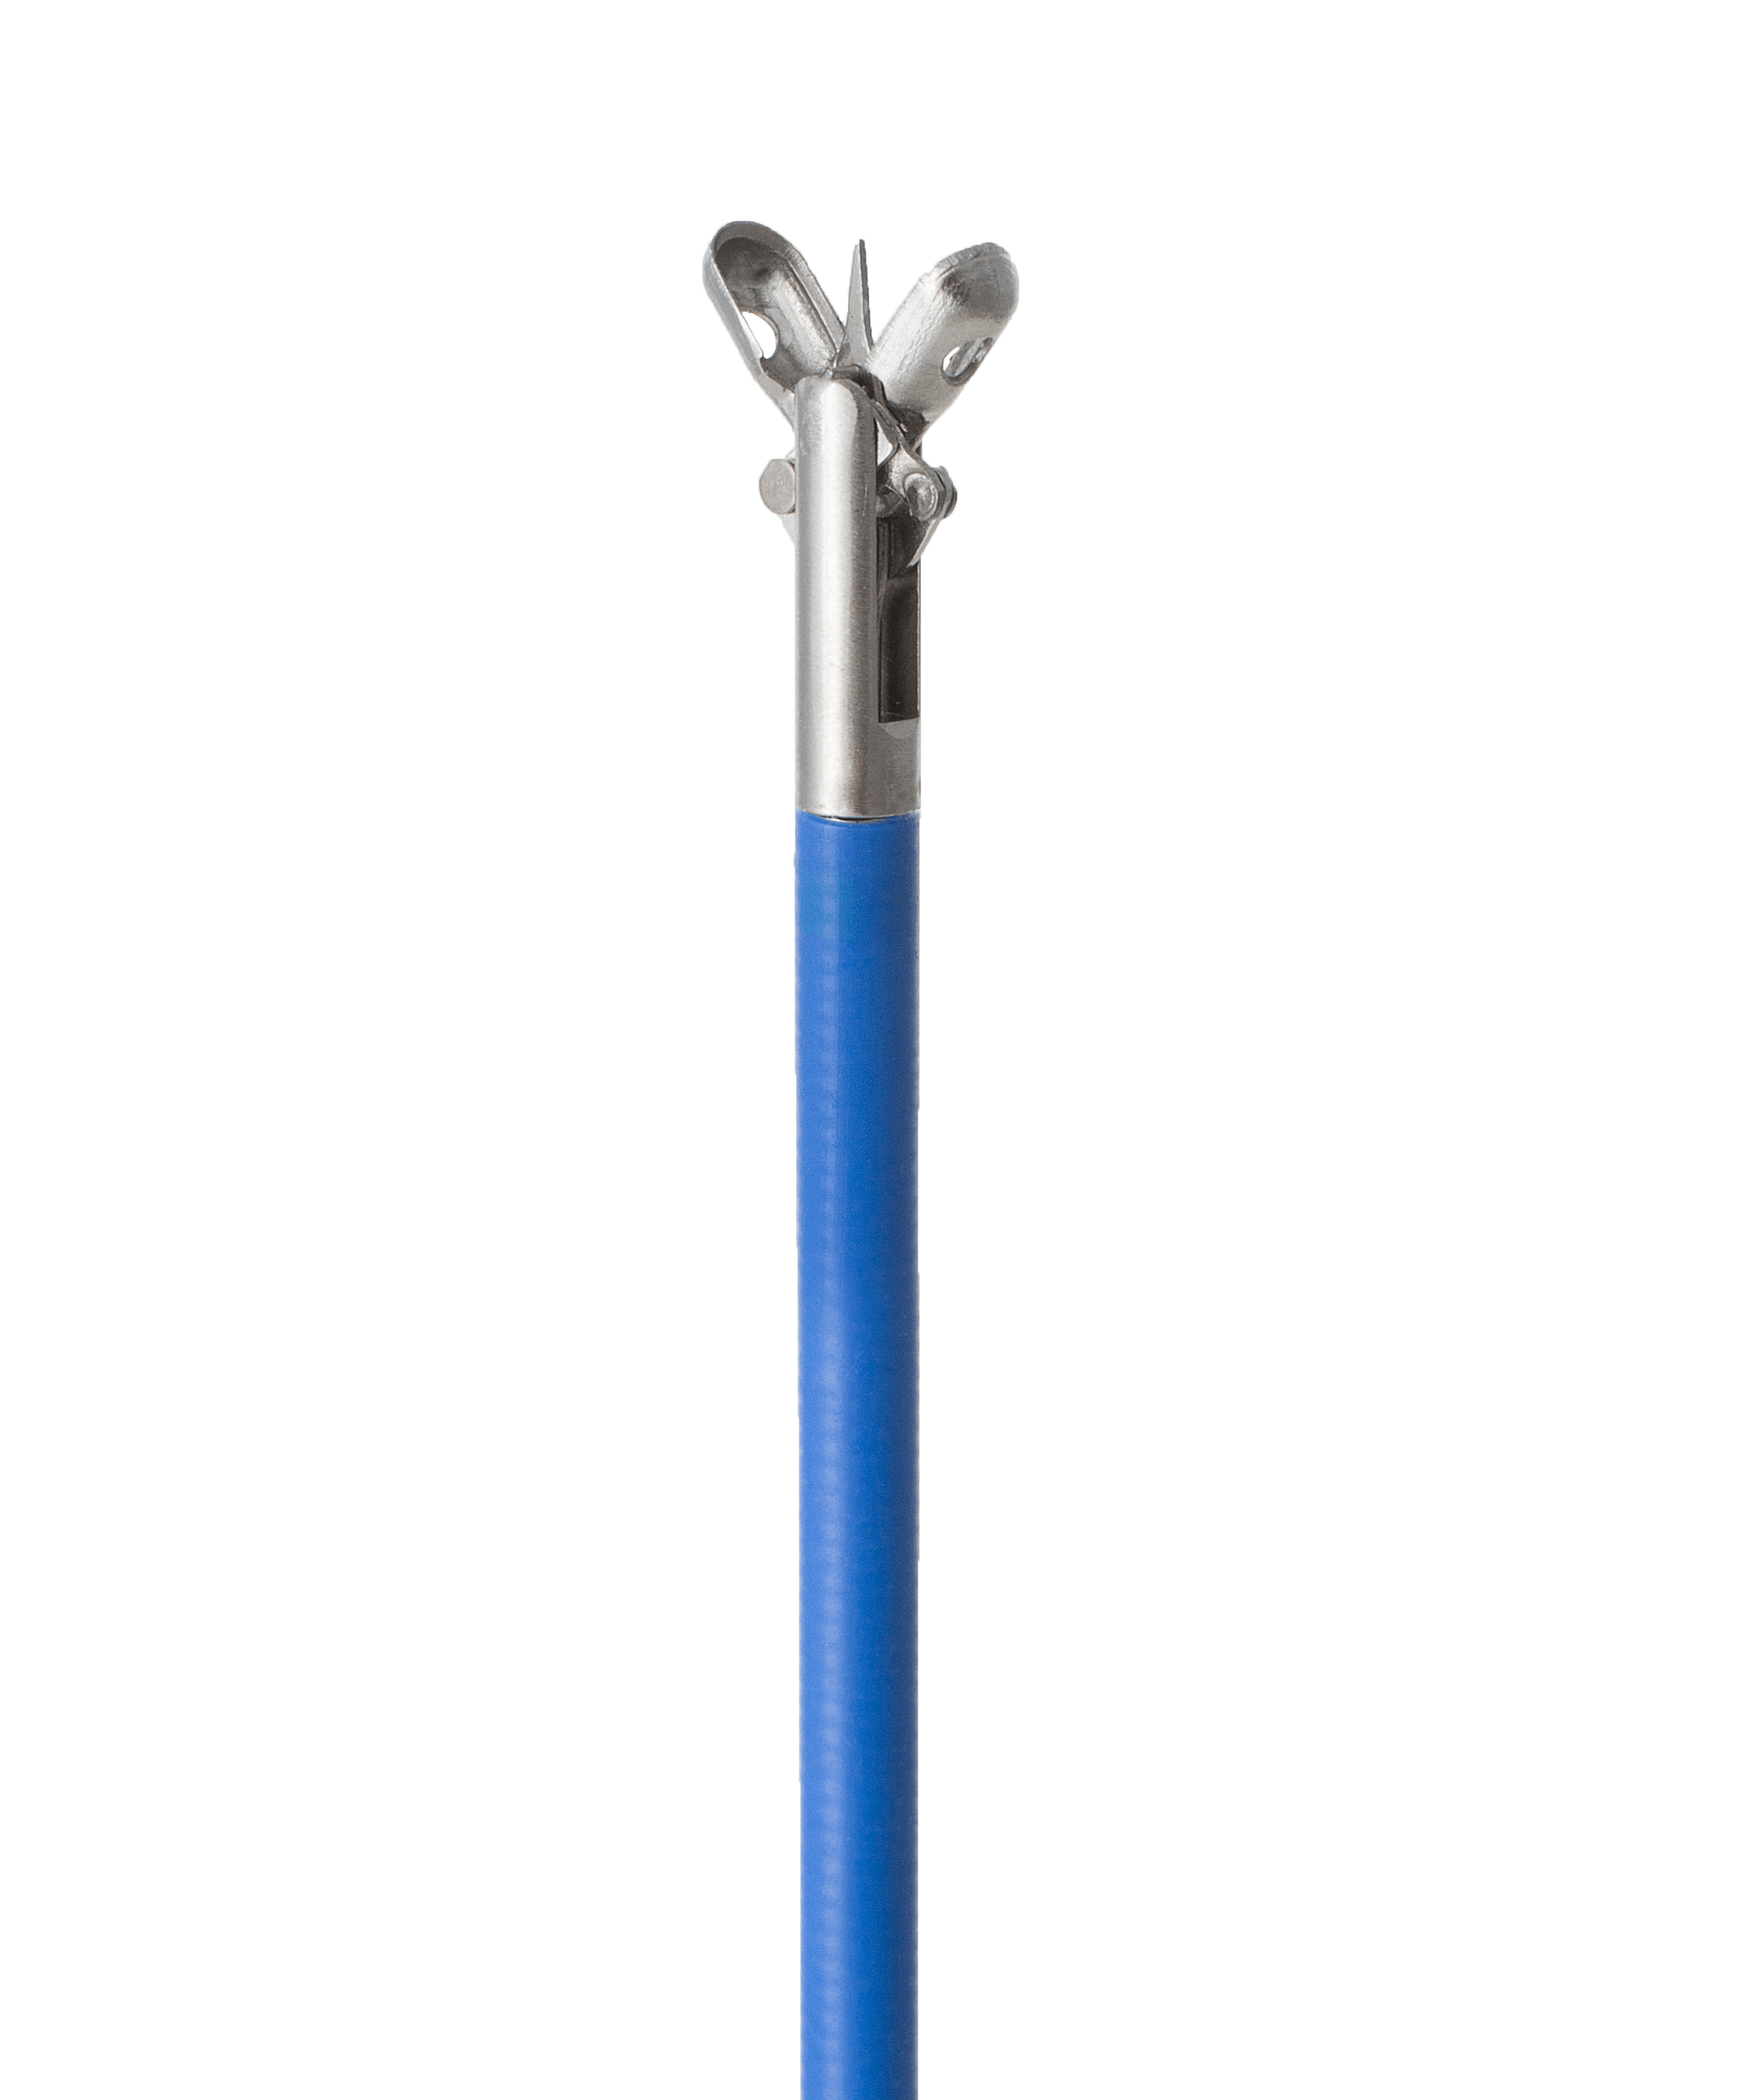 disposable biopsy forceps